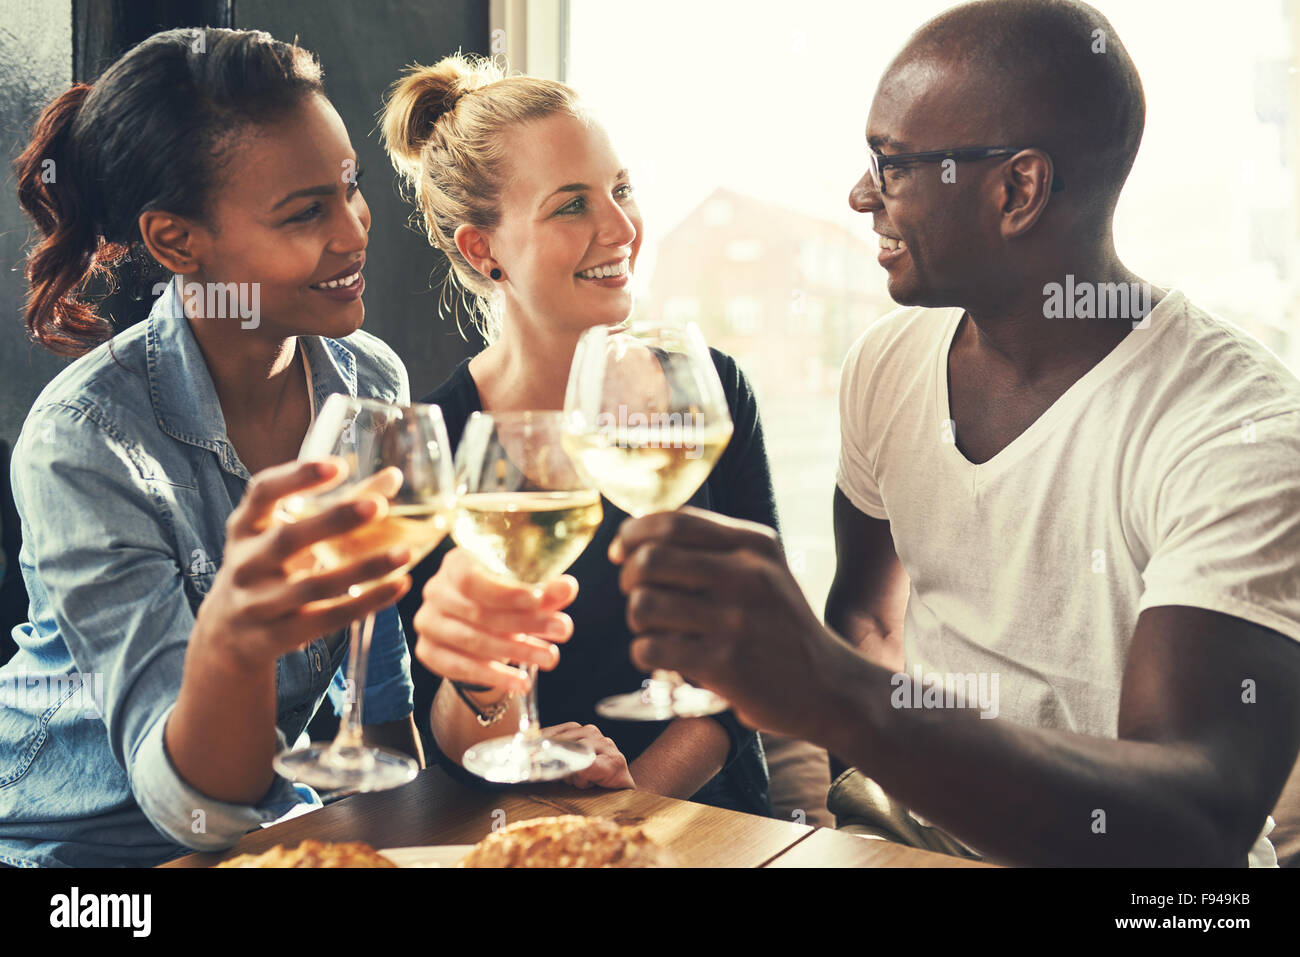 Ethnic friends at a bar drinking wine and eating tapas Stock Photo